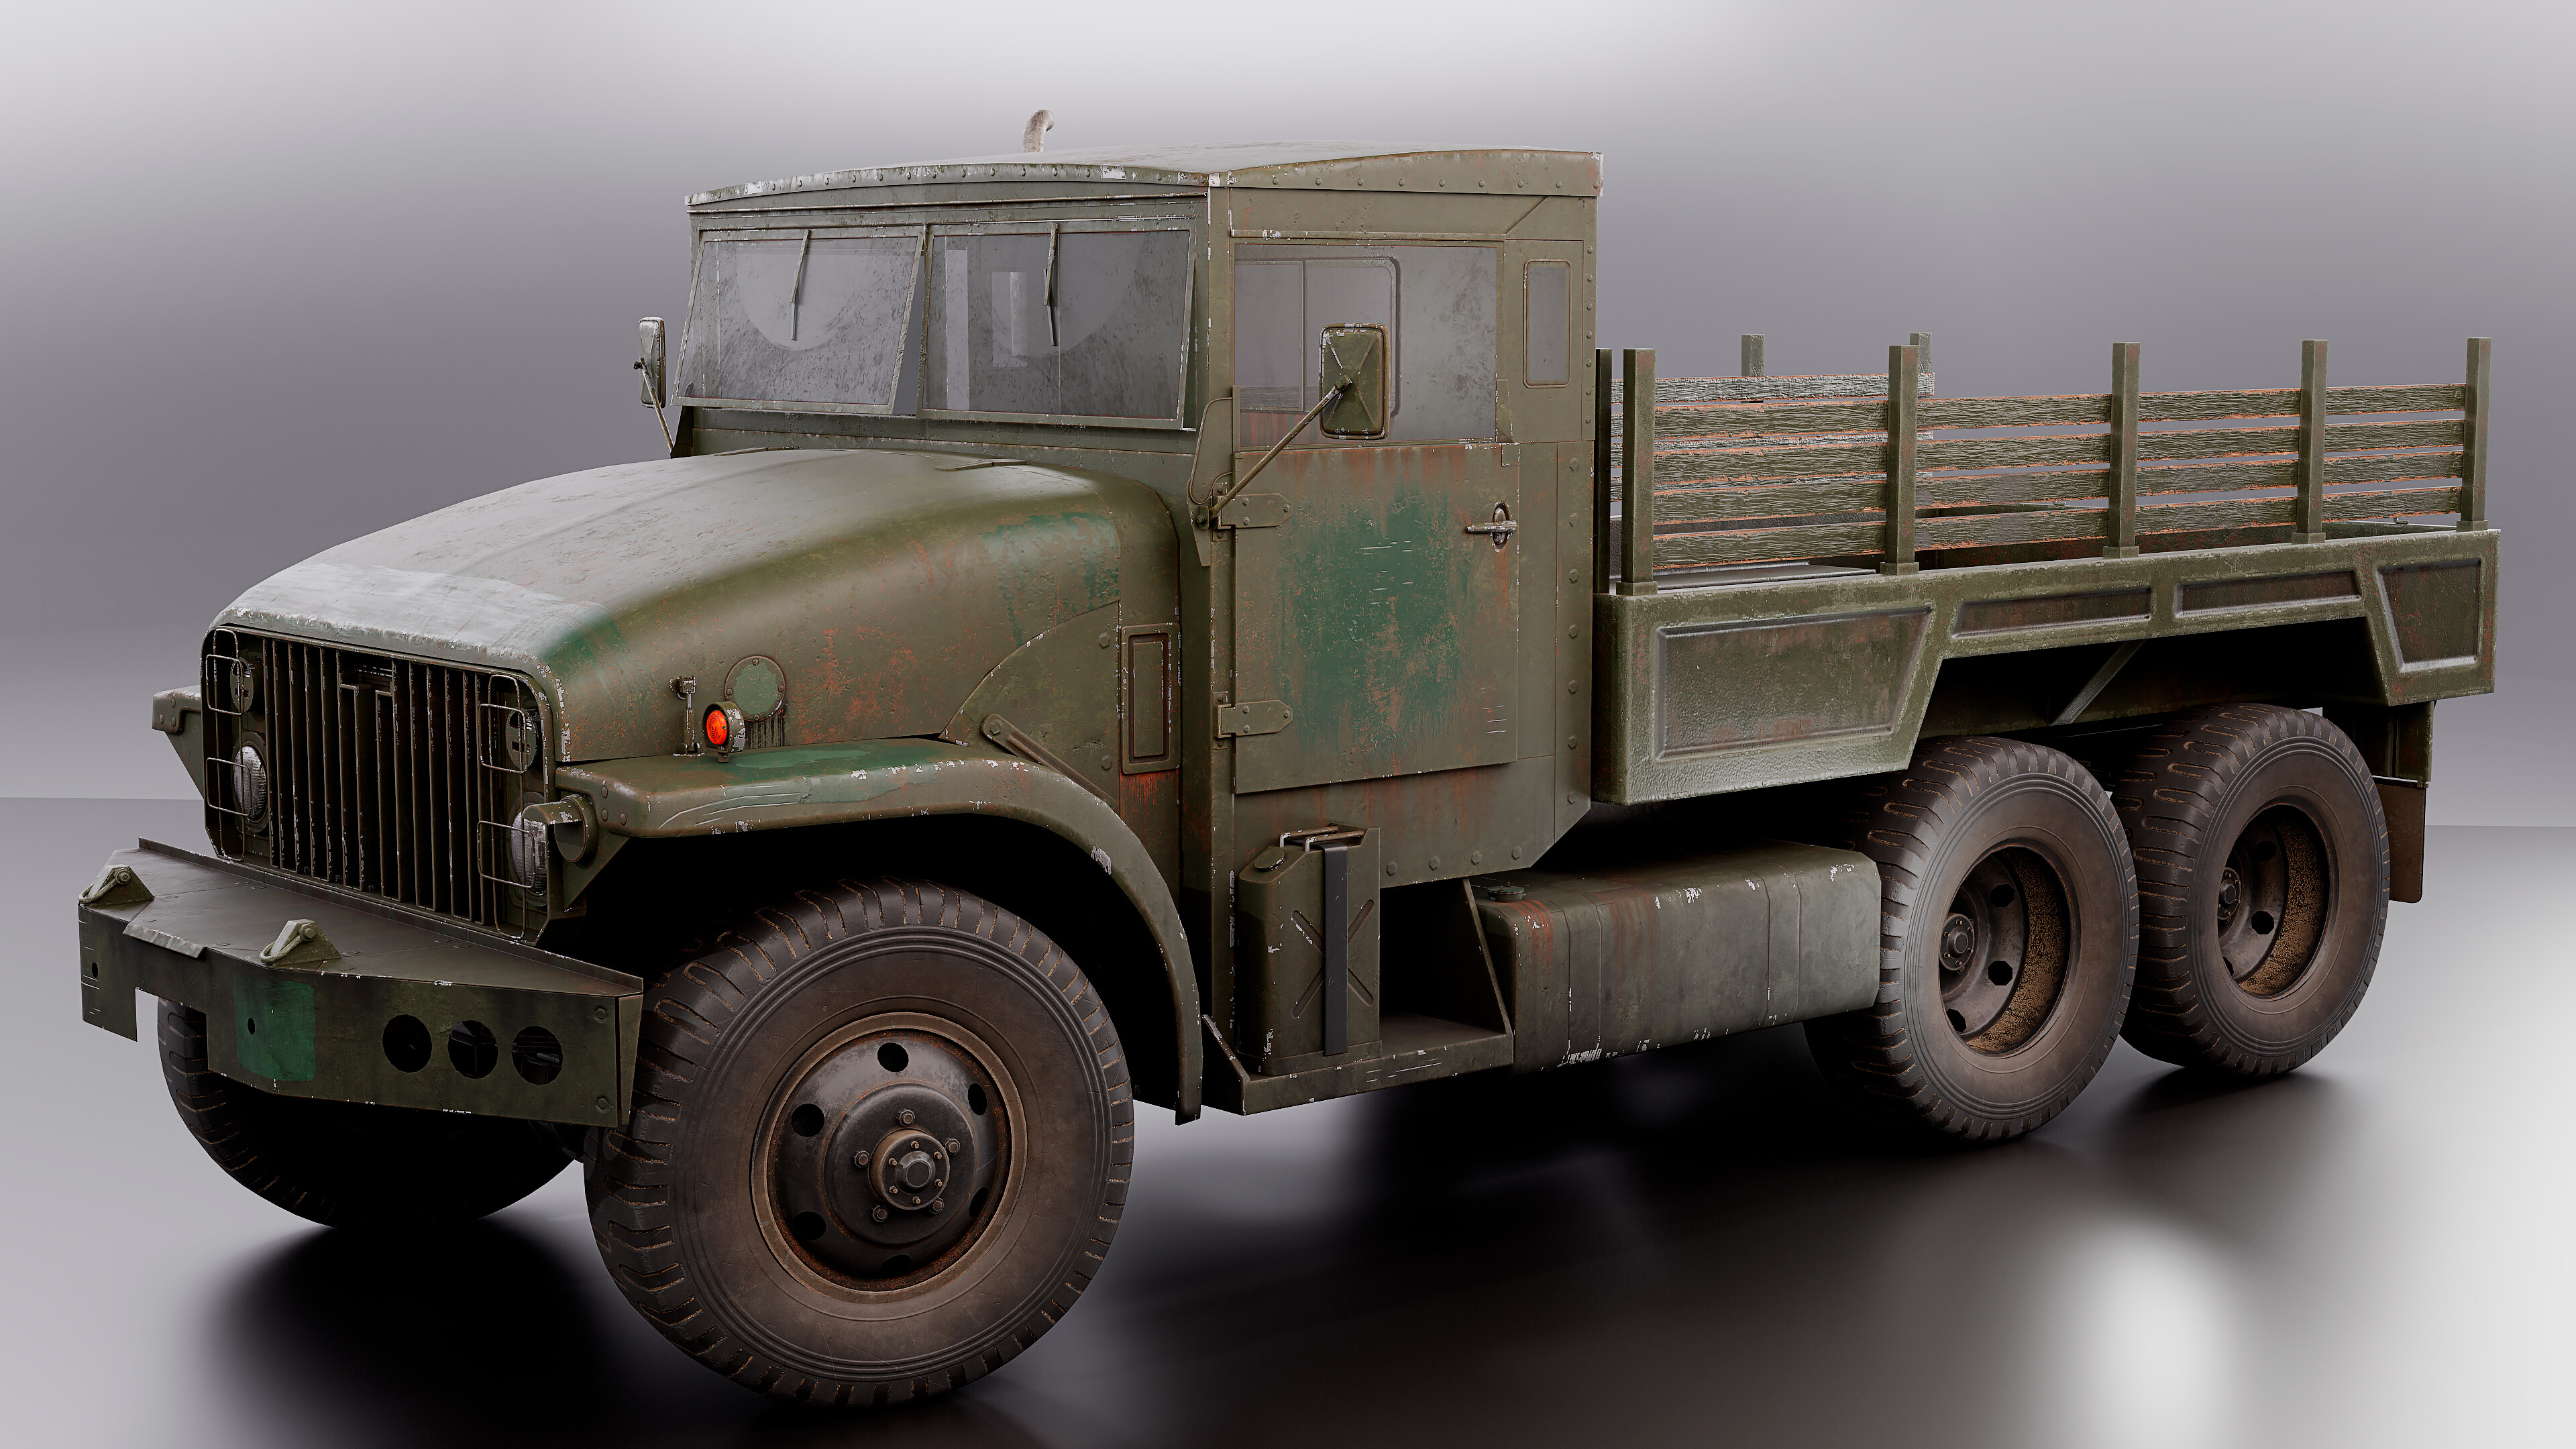 Military truck - Finished Projects - Blender Artists Community